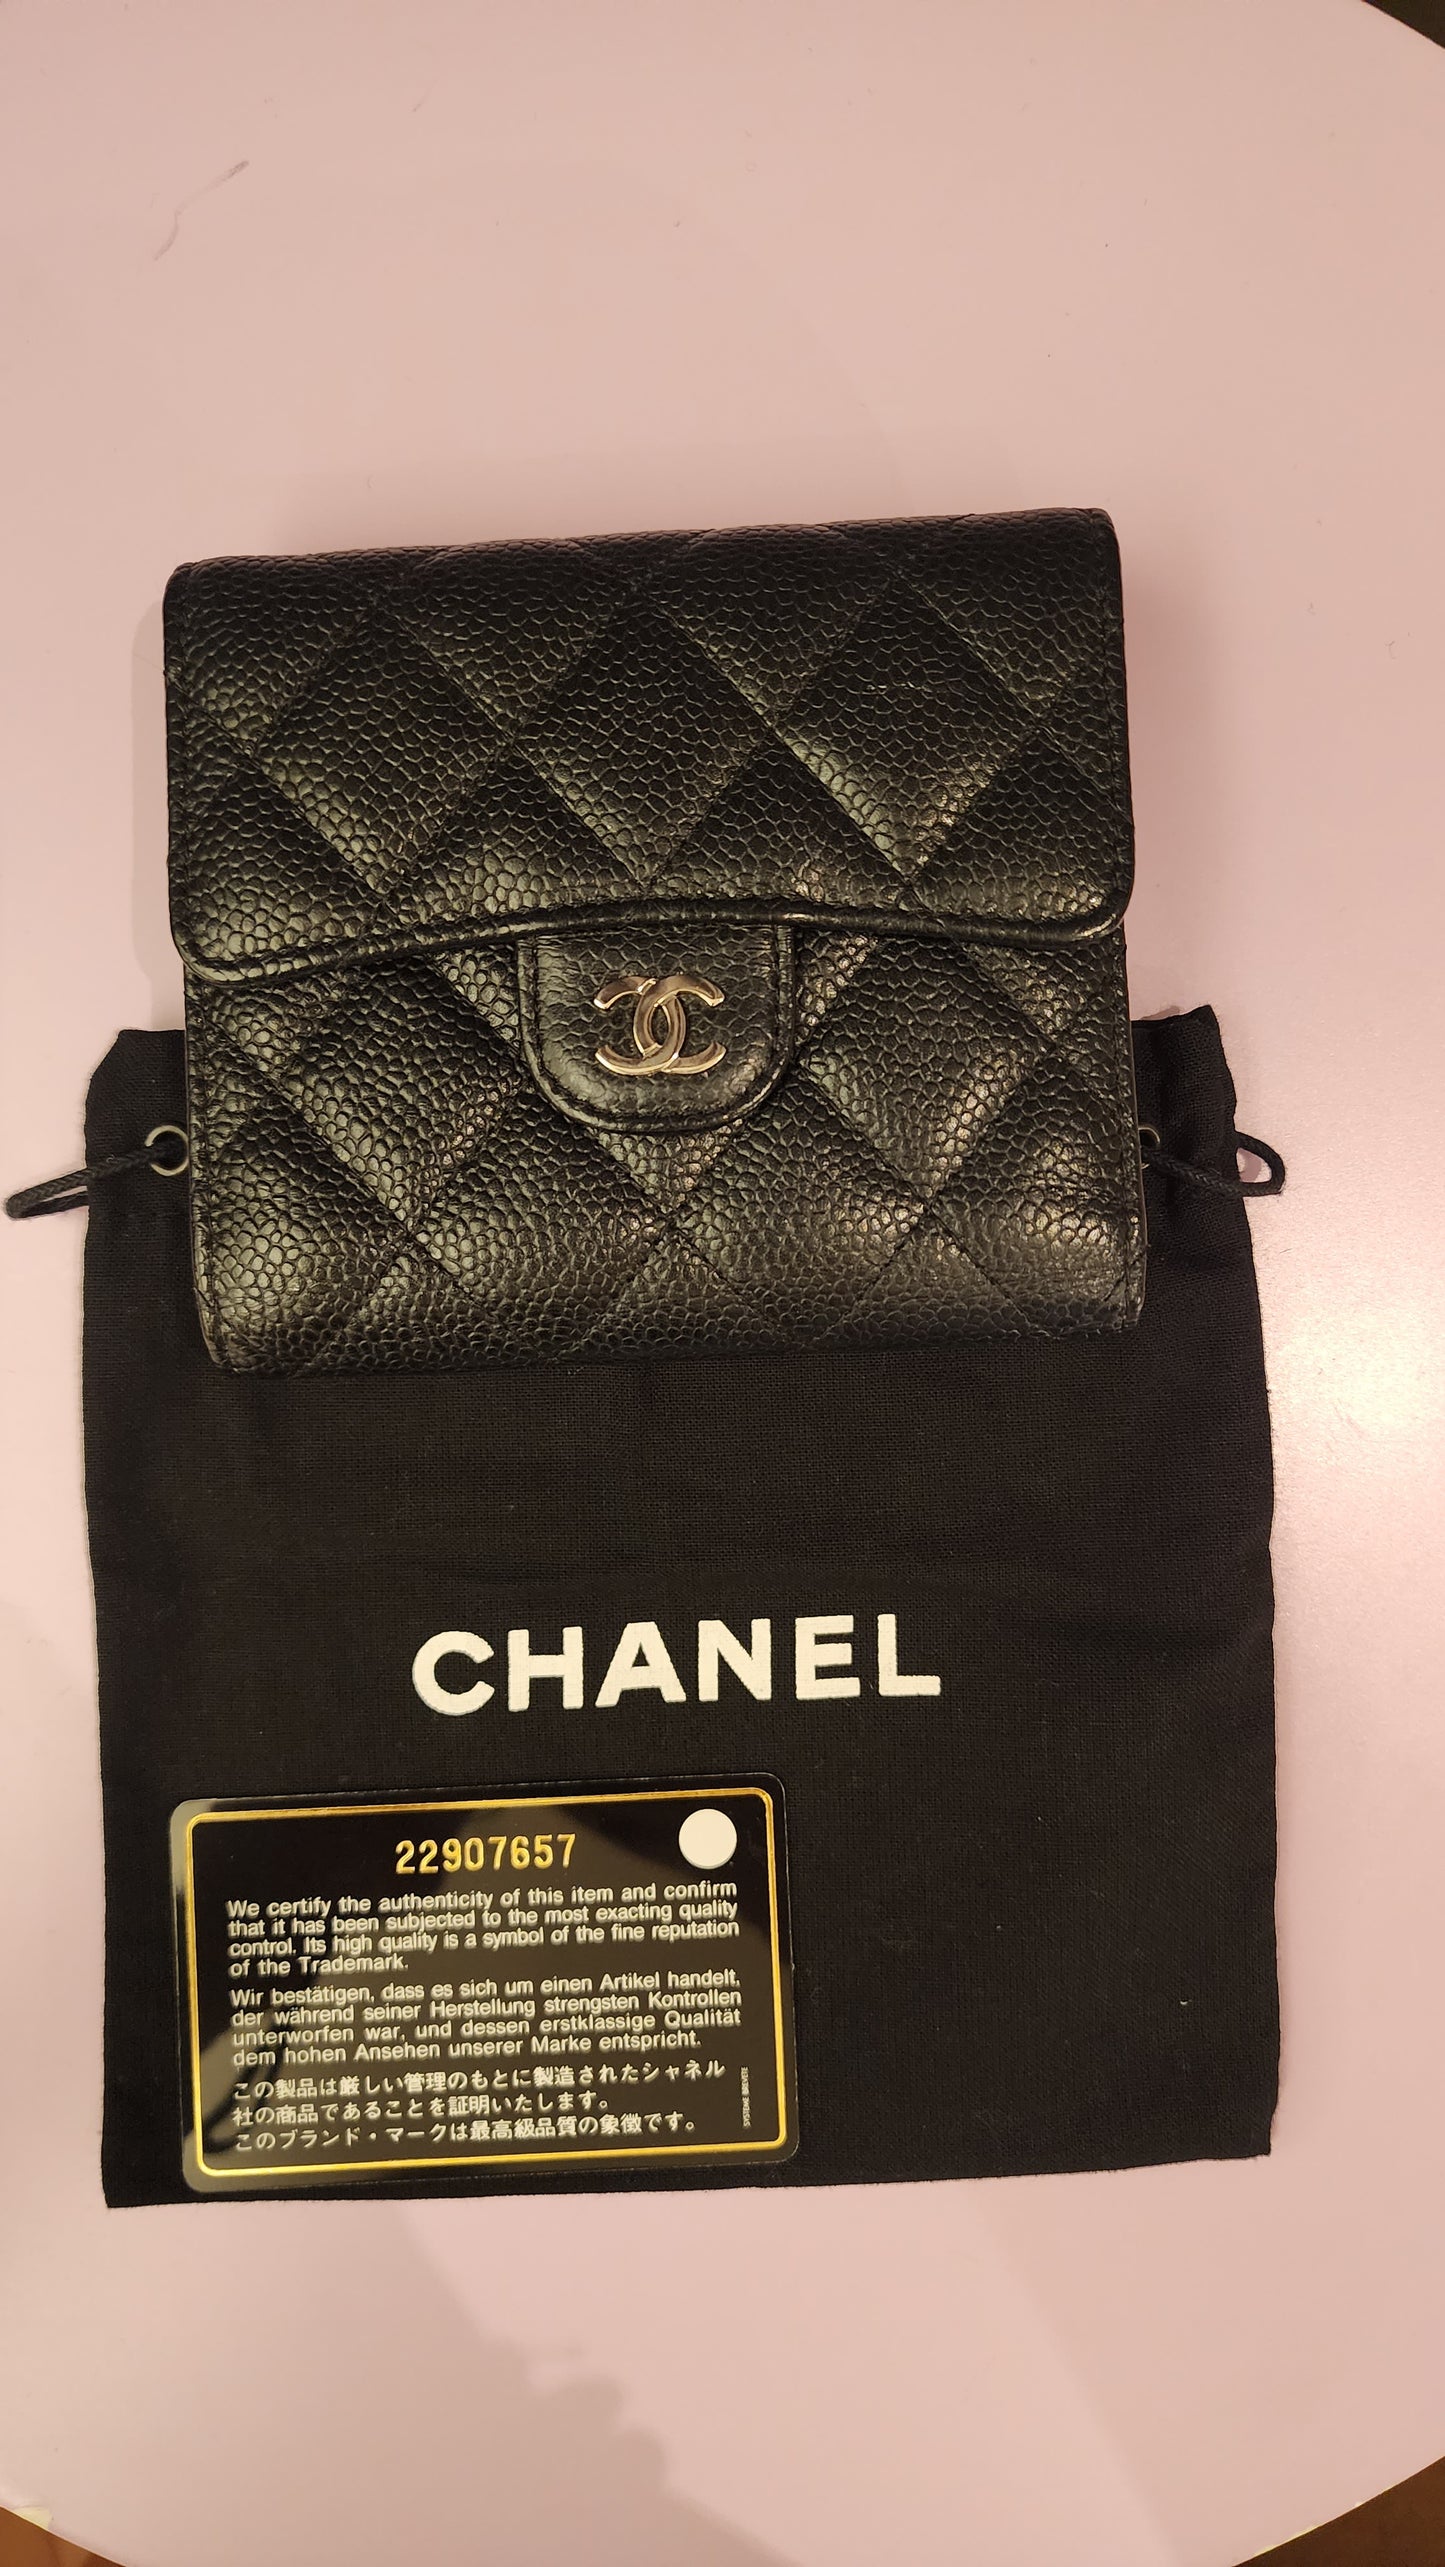 IN TRANSIT - CHANEL TRI FOLD SMALL WALLET